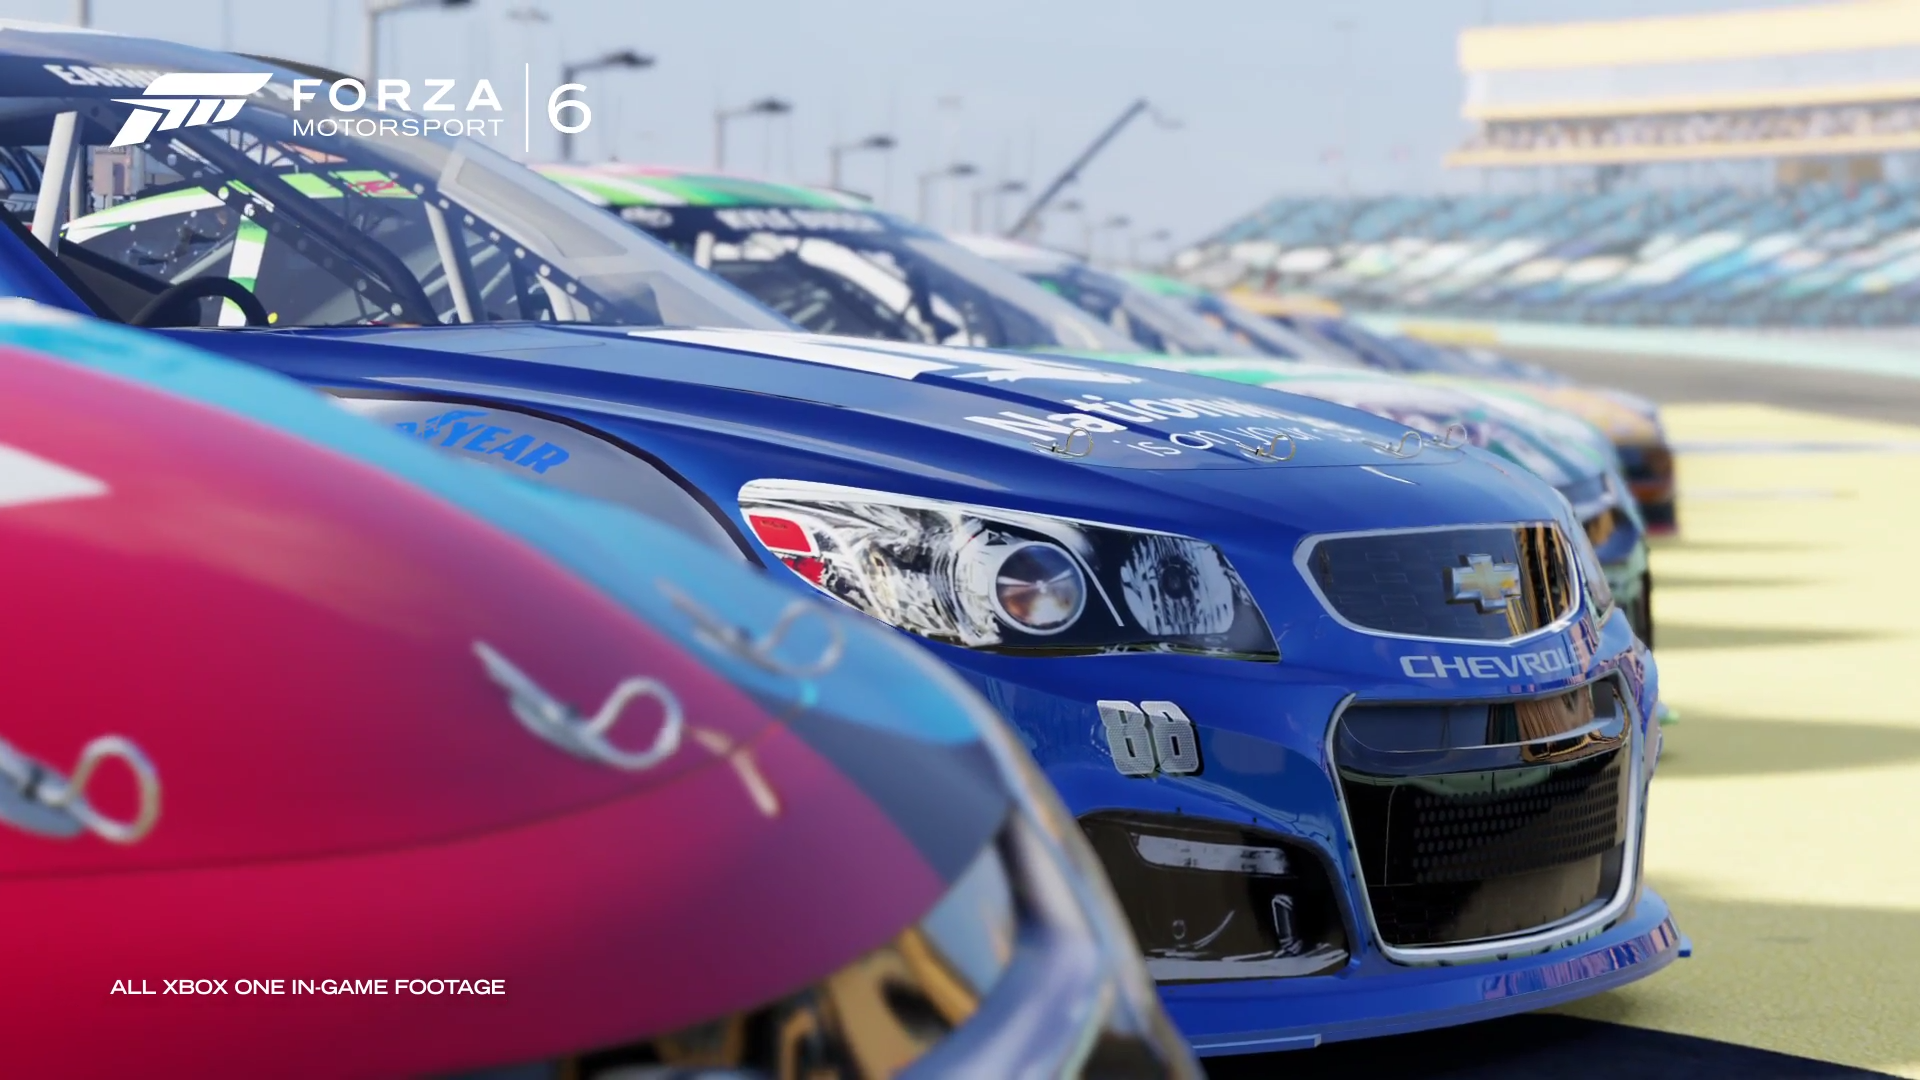 How long is Forza Motorsport 6 - Nascar Expansion?